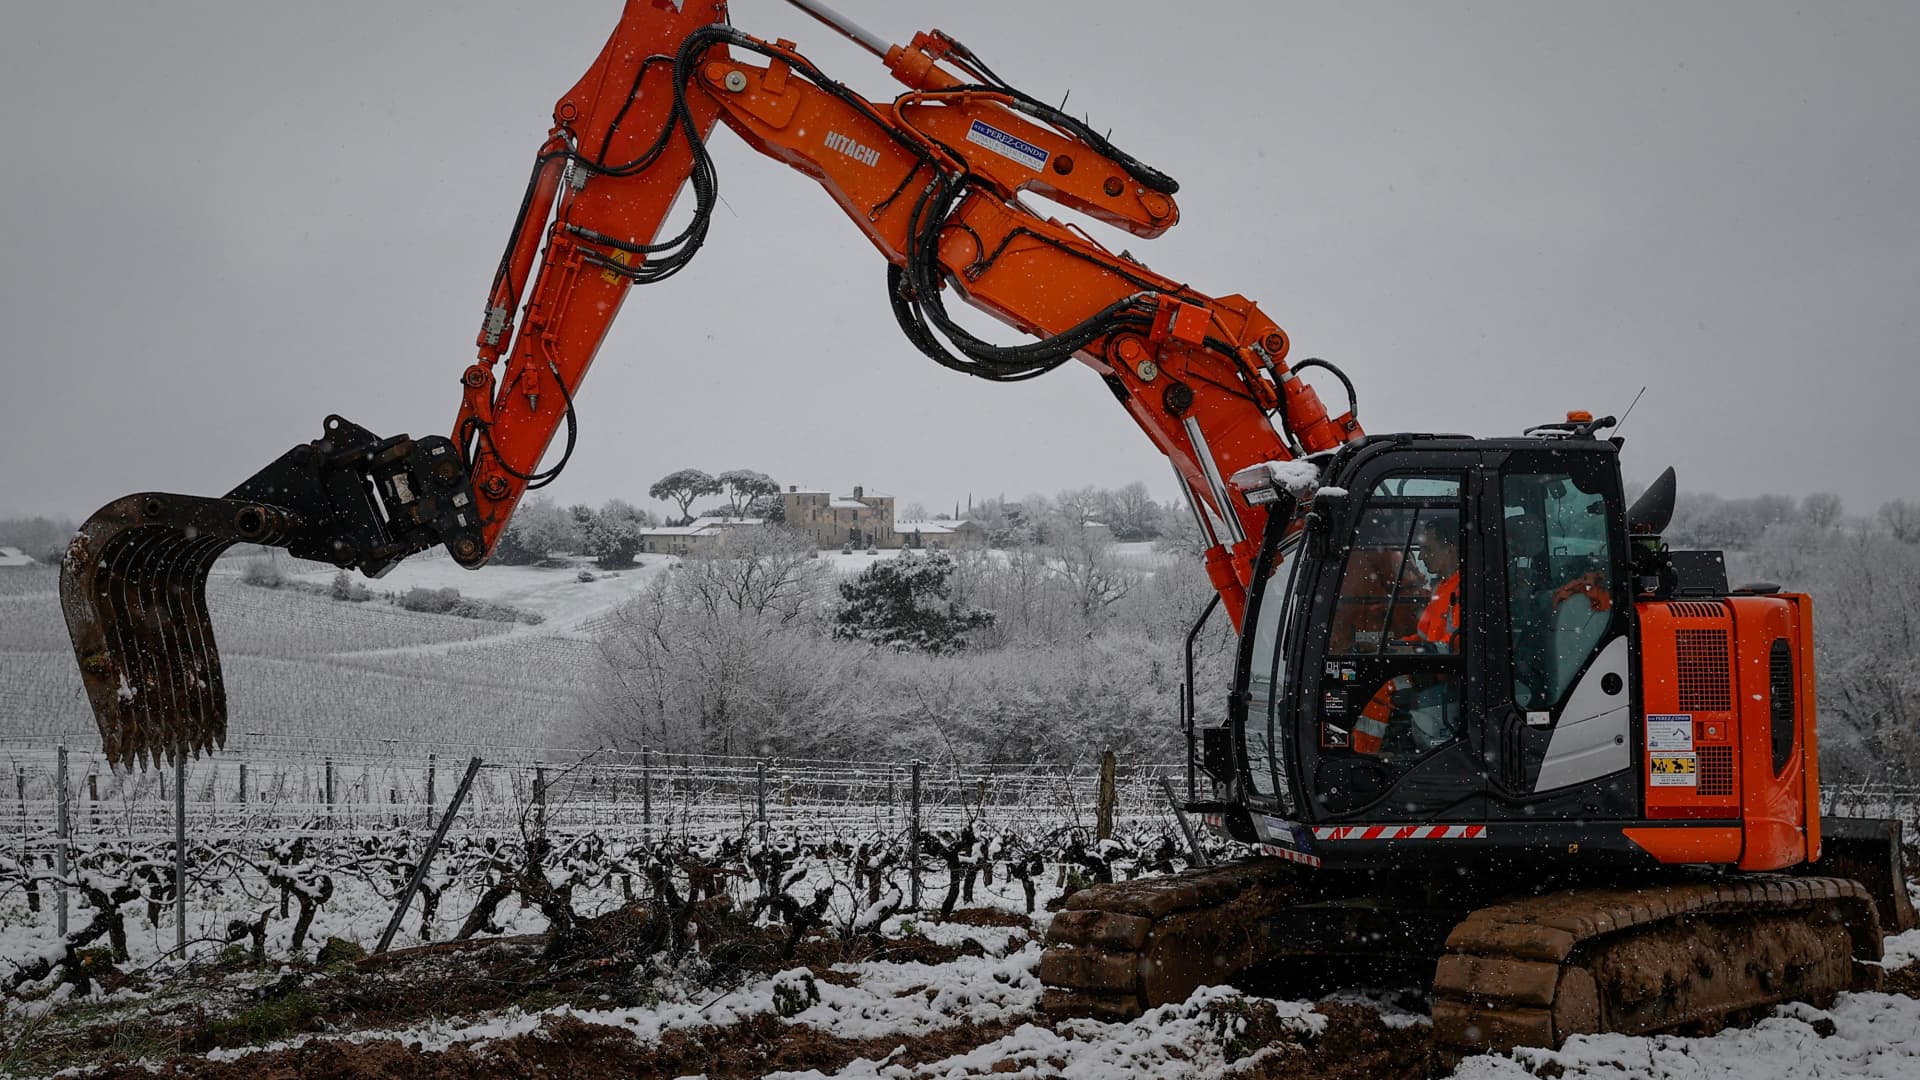 France pays winemakers to rip up vines as famous Bordeaux region faces uncertain future